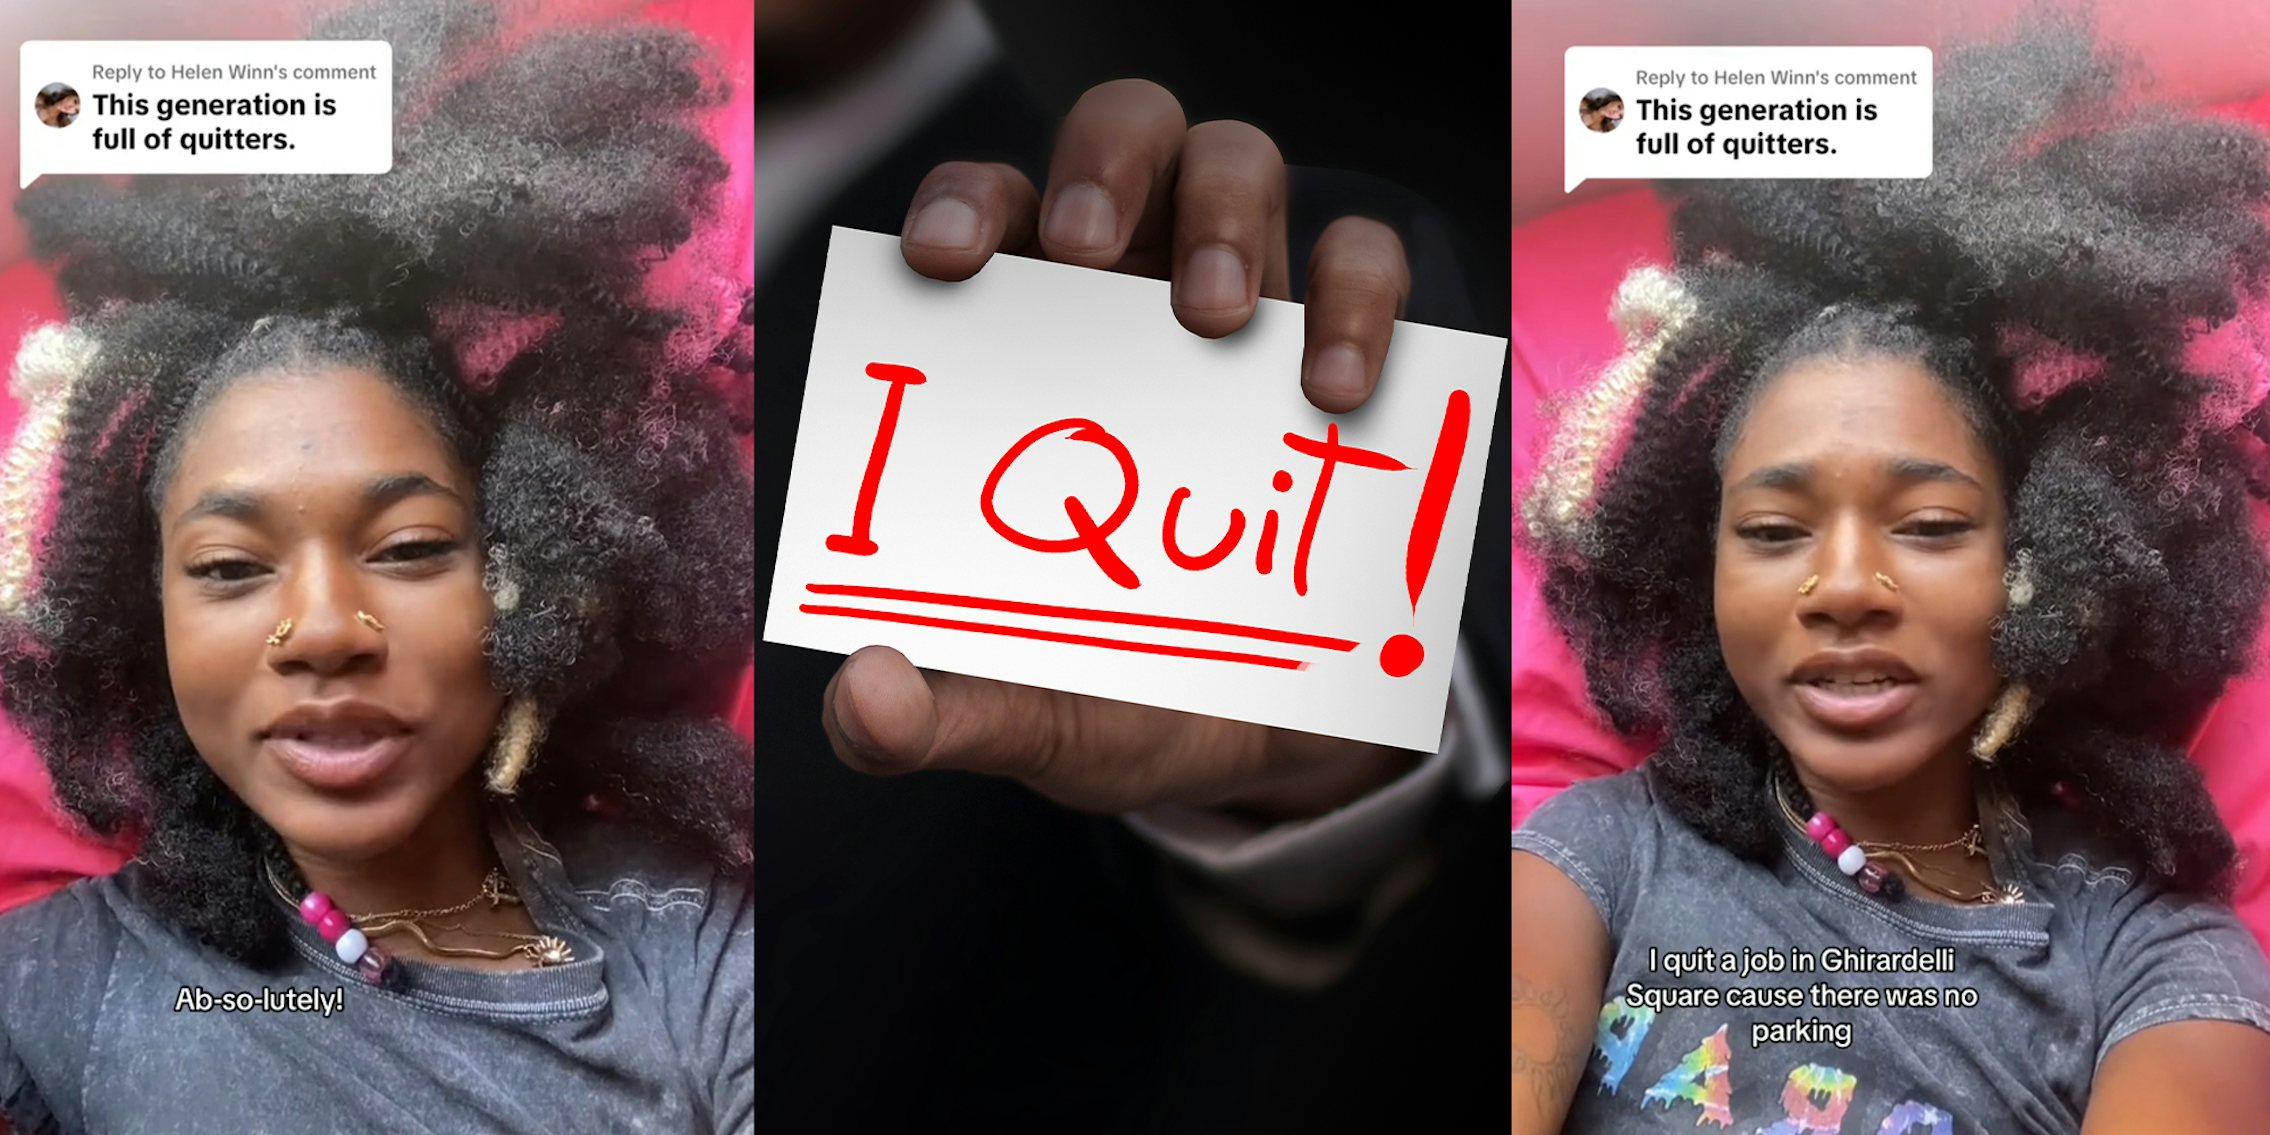 black woman laying down in bed; hand holding sign saying 'I quit!'